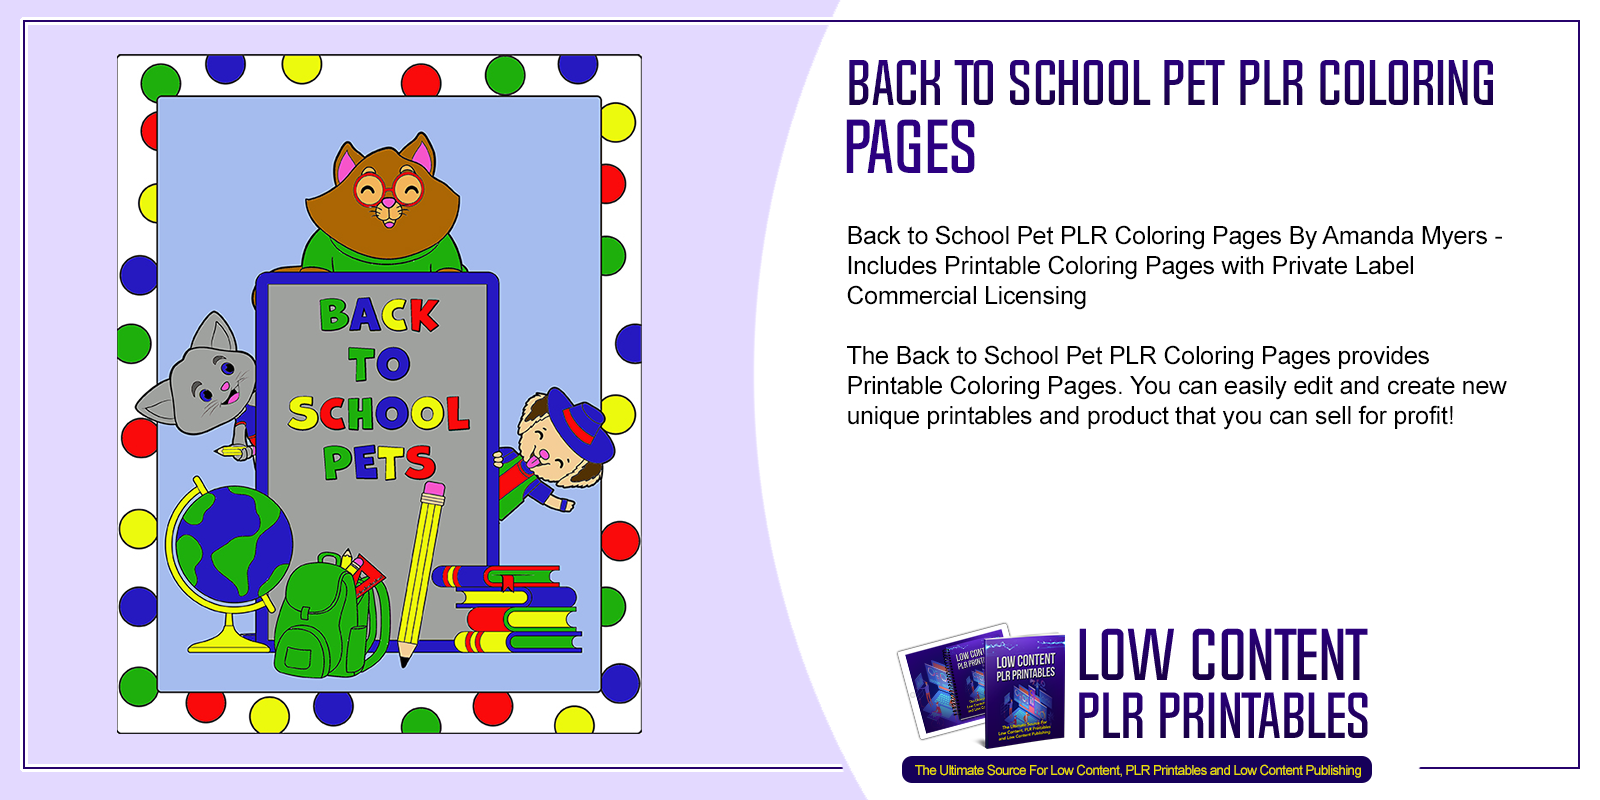 Back to School Pet PLR Coloring Pages